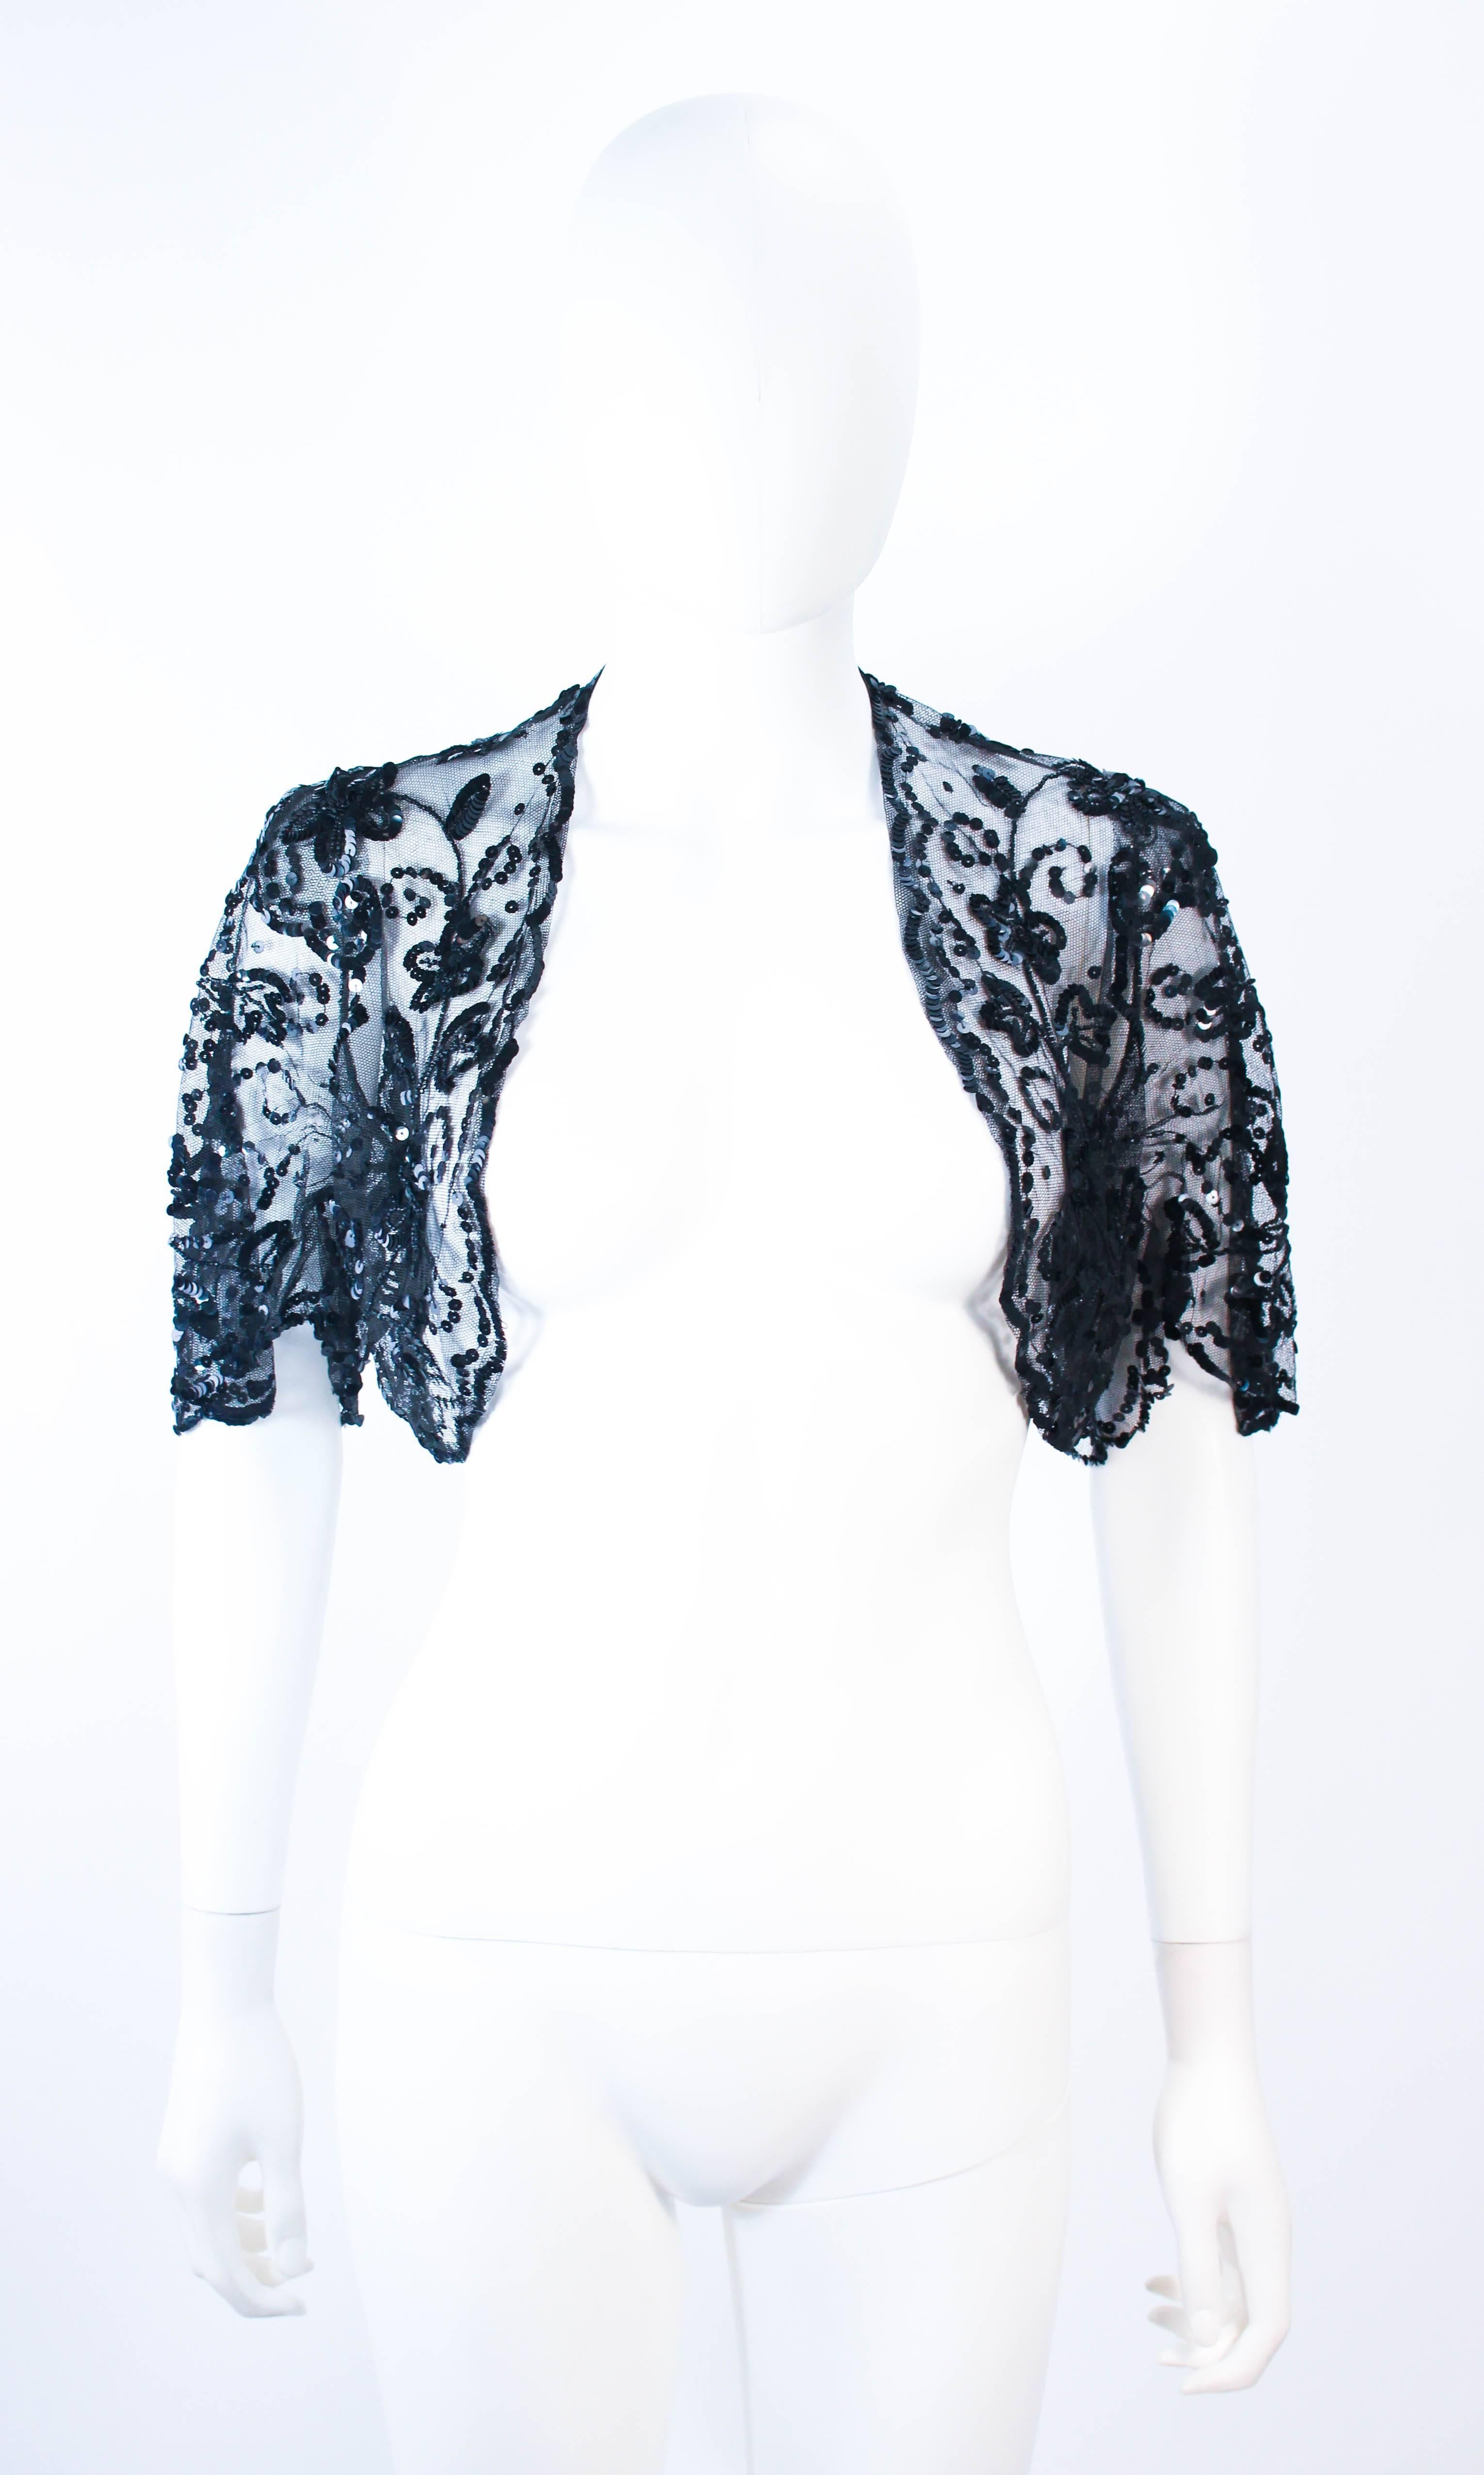 This antique jacket is composed of a sheer black mesh with black sequin applique. Features an open style with a drape style sleeve. In excellent vintage condition. 

**Please cross-reference measurements for personal accuracy. Size in description